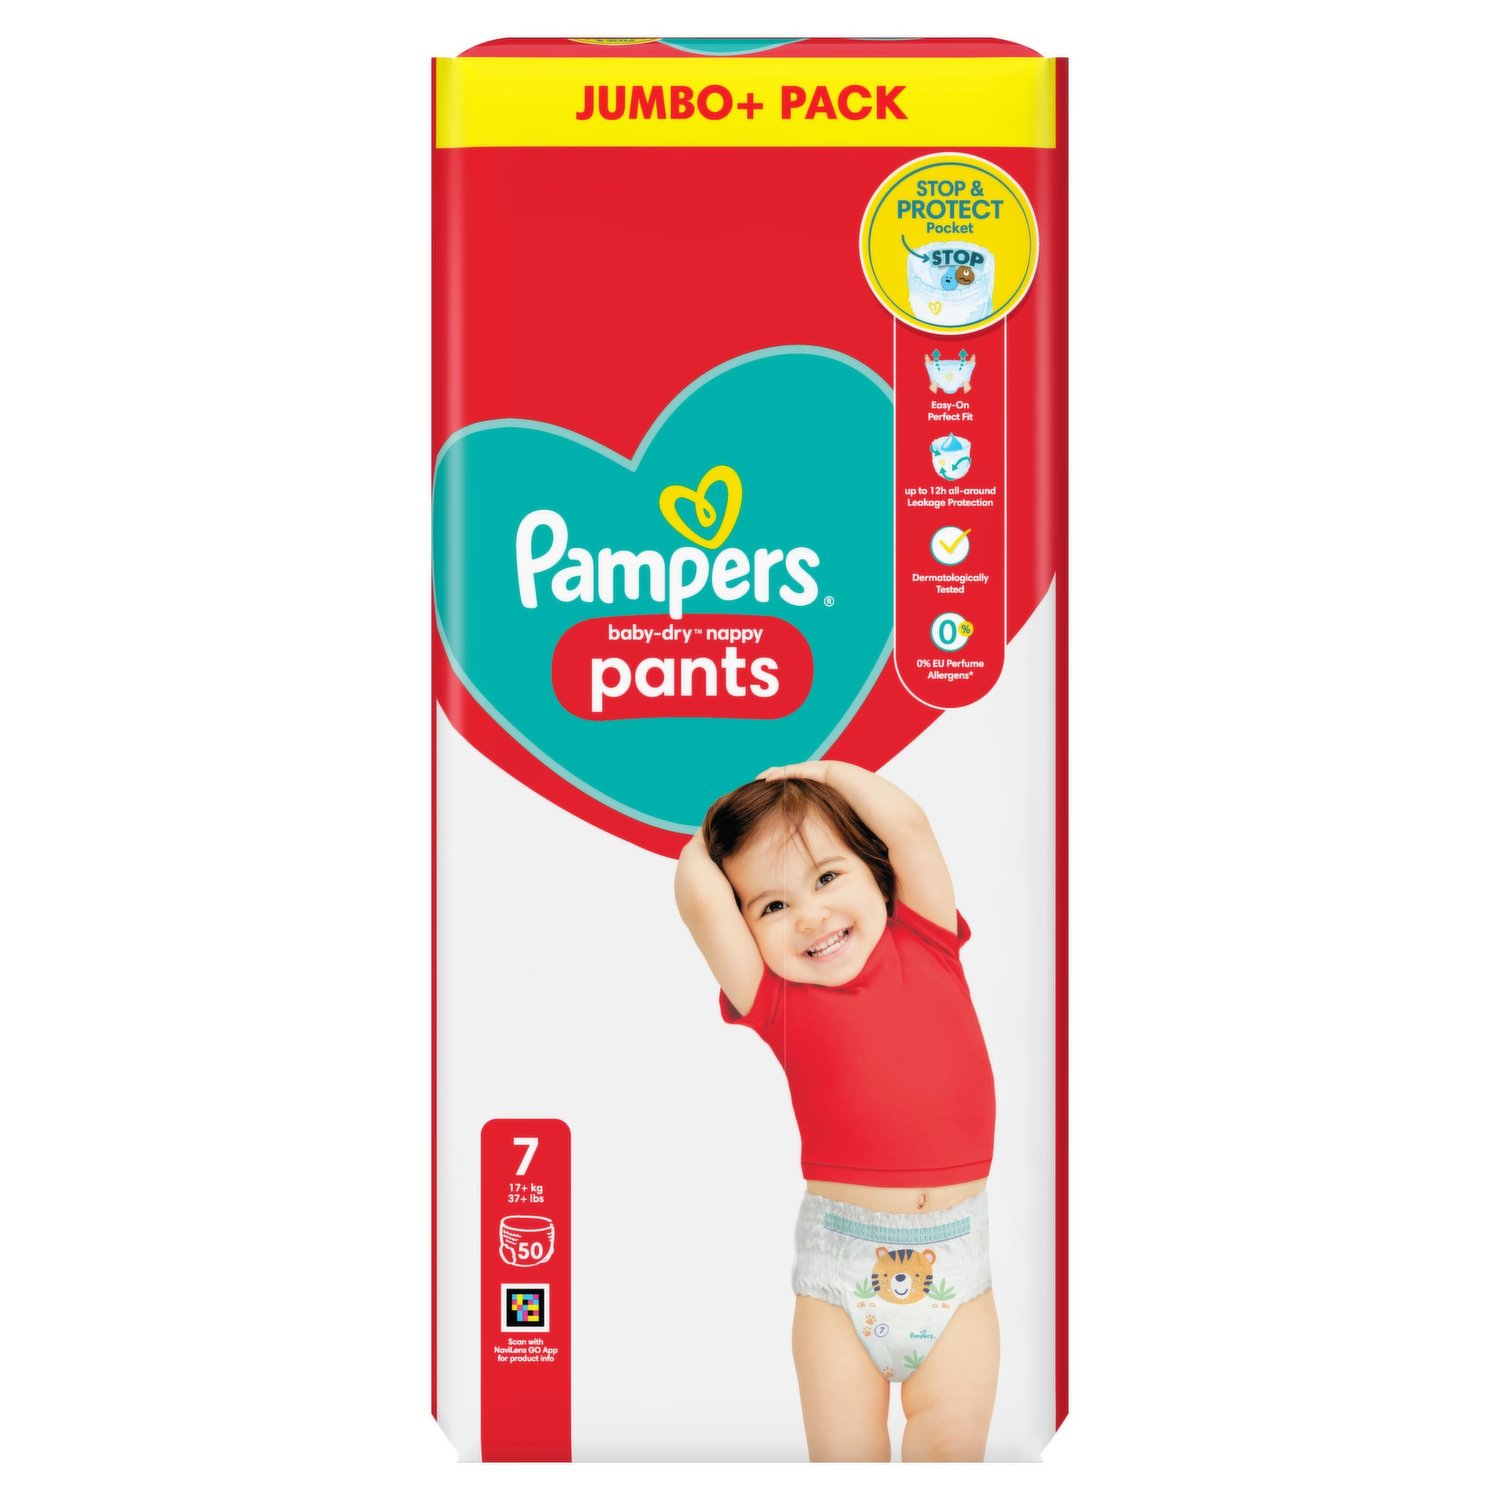 Pampers Premium Protection Nappy Pants, Size 6 (15kg+) Jumbo+ Pack